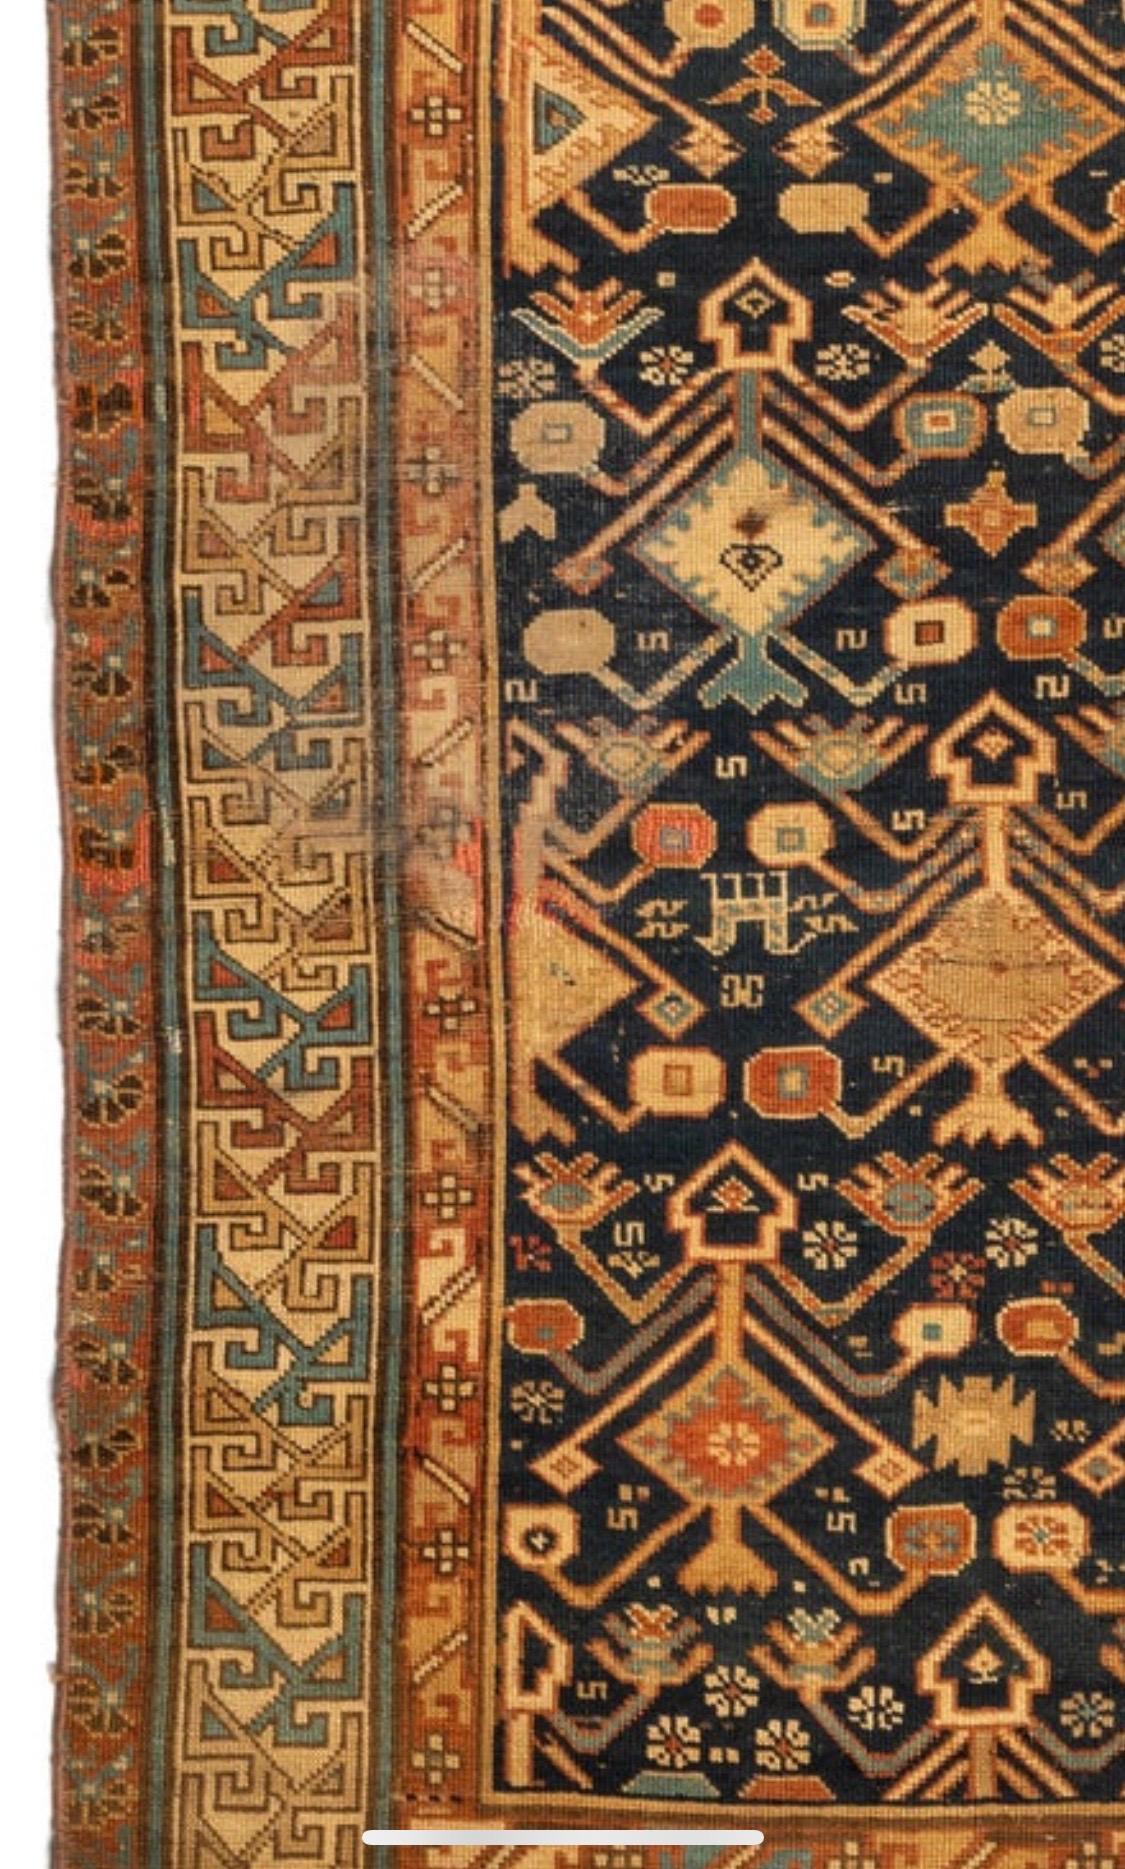 Dagestan rugs are small floor coverings woven in the republic of Dagestan in the Eastern Caucasus (Russia). 

This lovely antique blue and ivory geometric Tribal Caucasian Dagestan rug, circa 1940s. Measures 3.6 x 5.3 ft. 

 